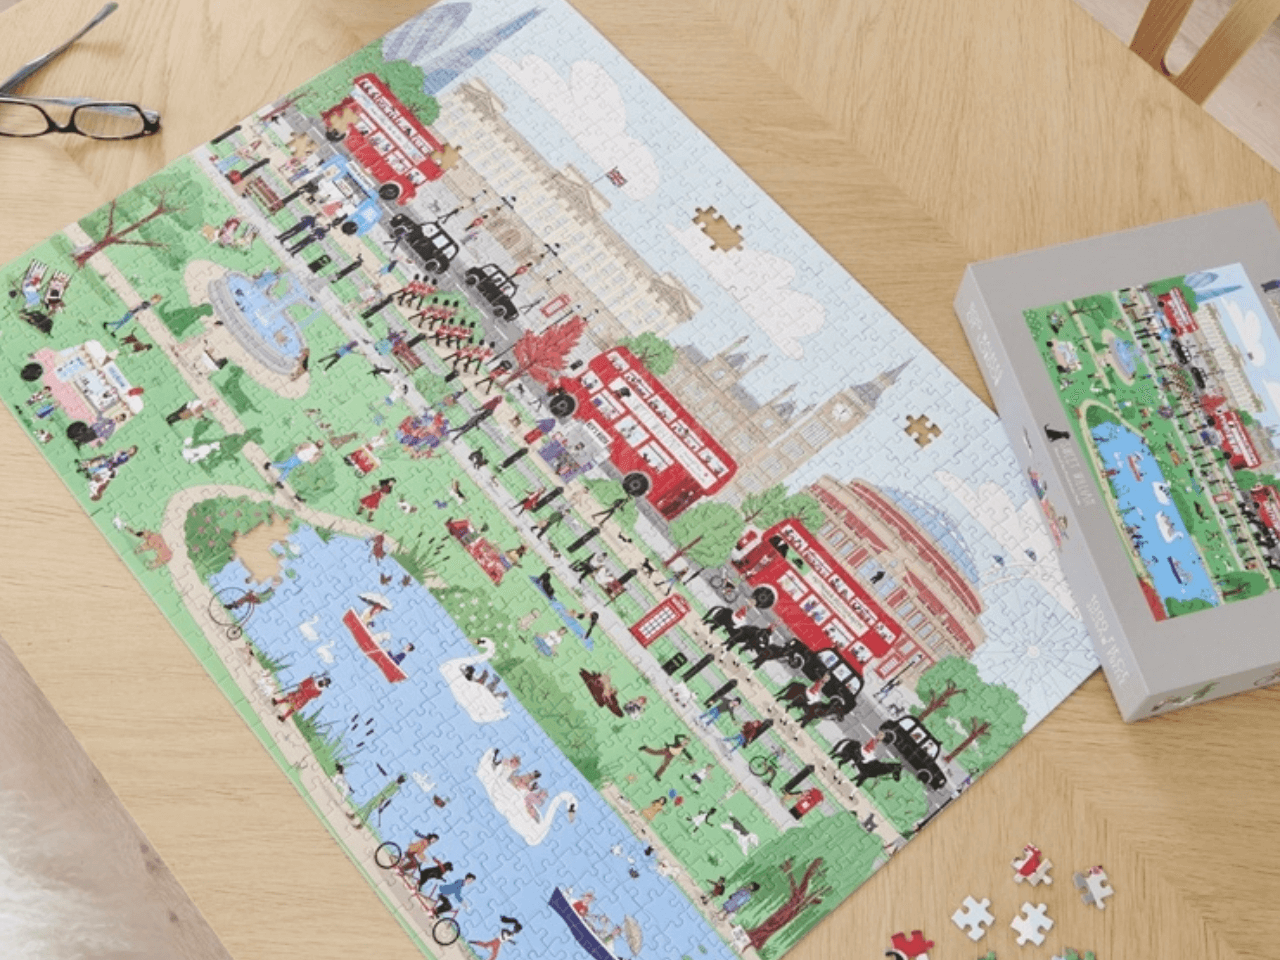 Dog Jigsaw puzzle being created with a few pieces of the puzzle left to put in